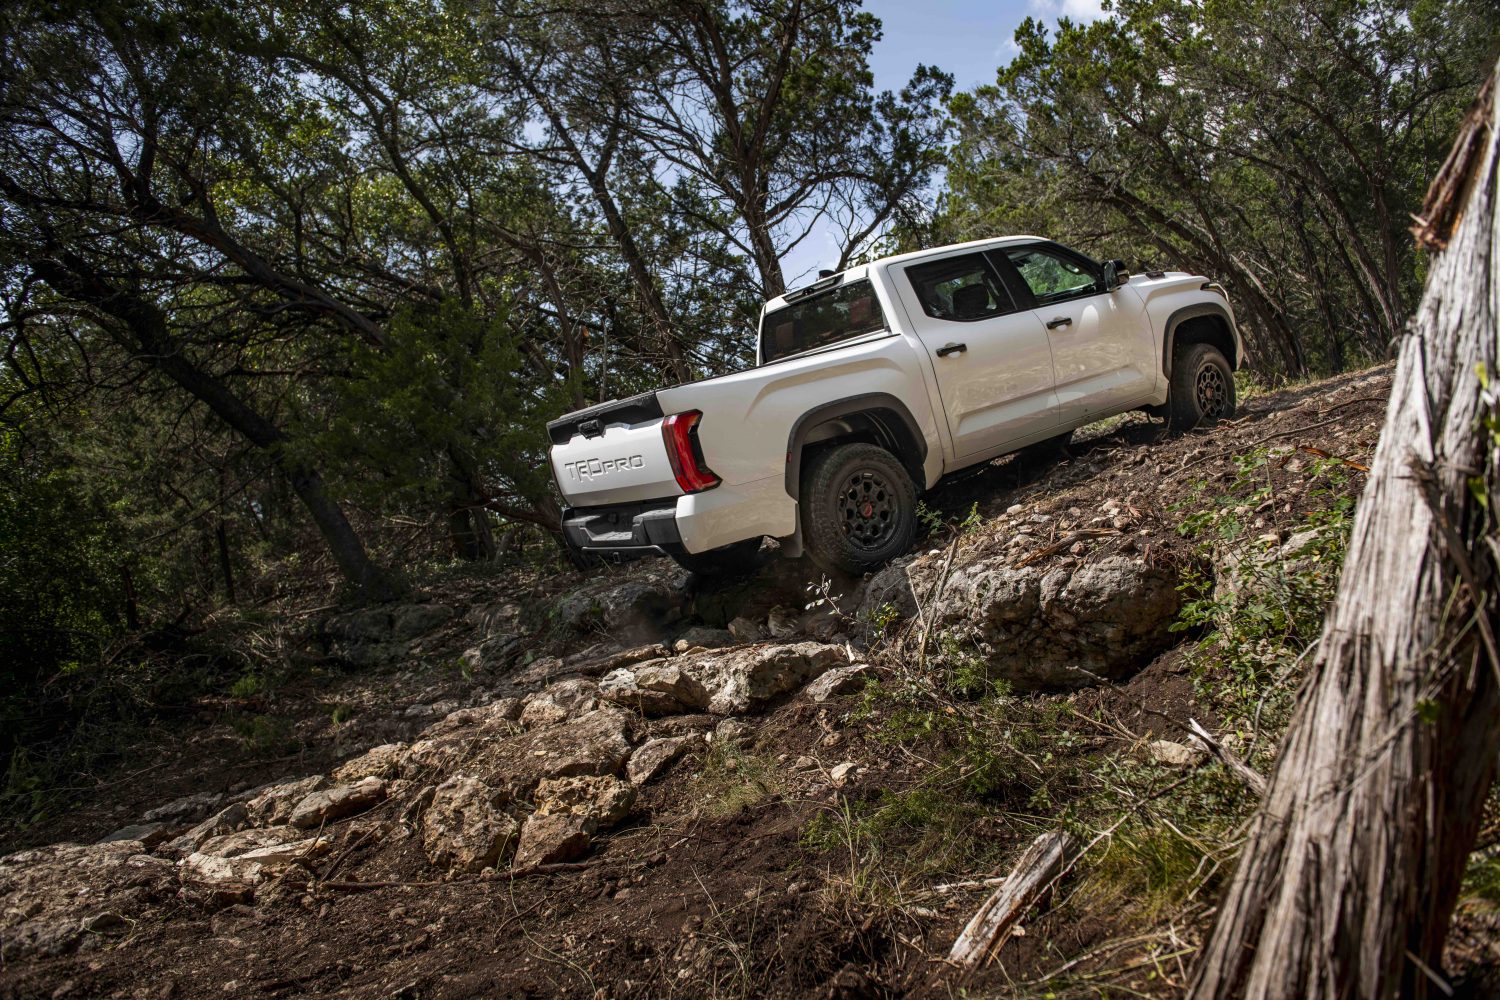 Promo of a 2022 Toyota Tundra pickup truck off road, climbing up a pile of rocks.